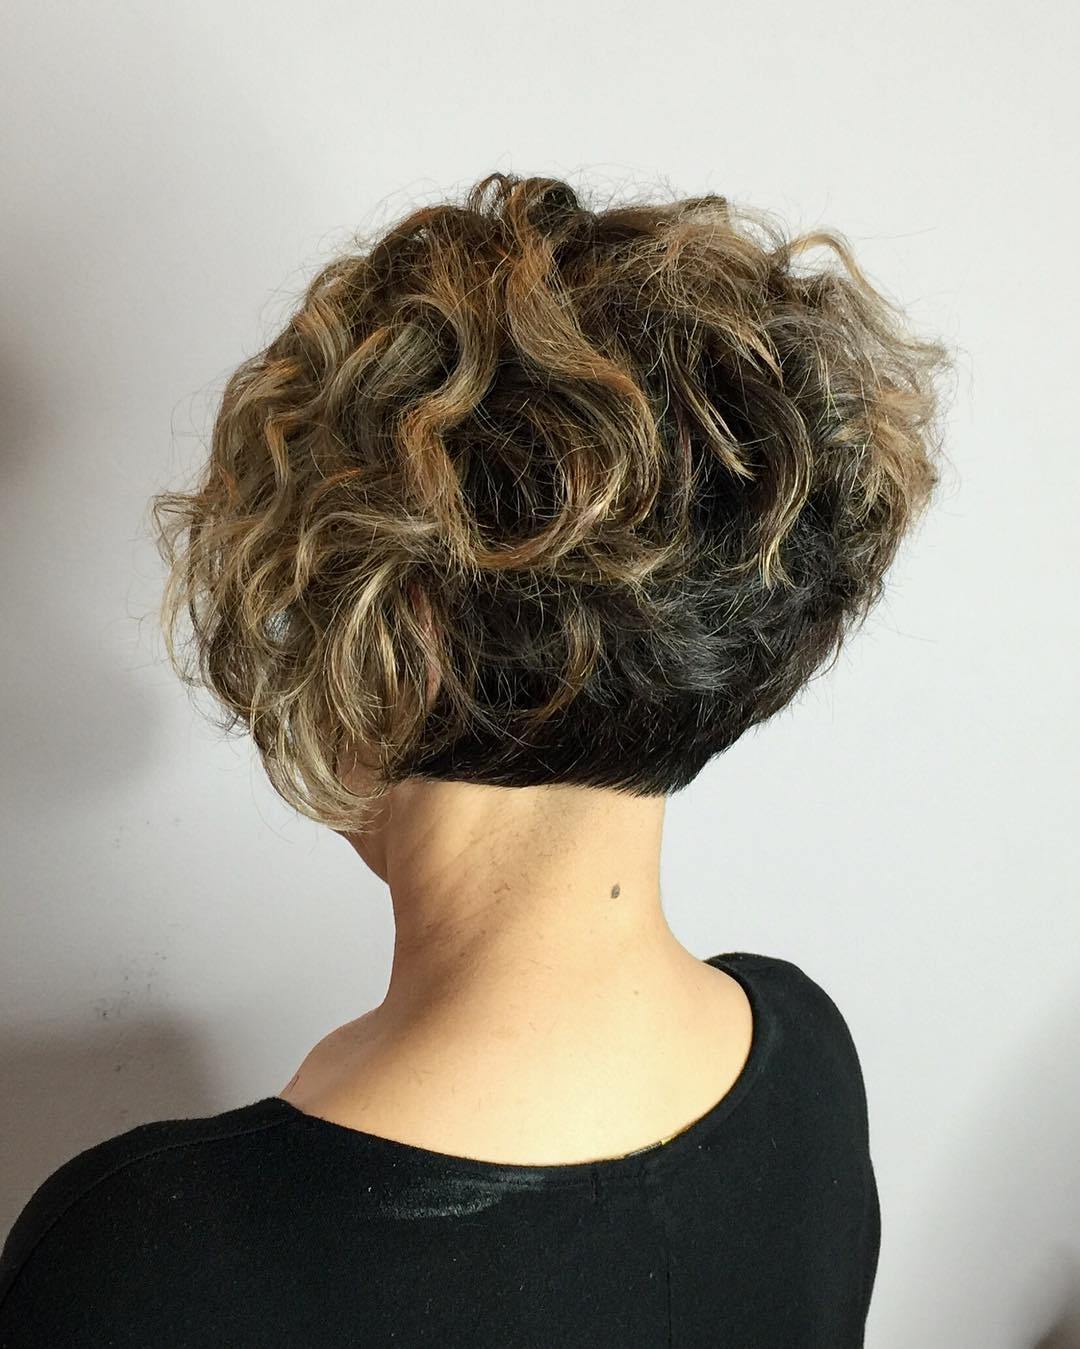 25 Lively Short Haircuts for Curly Hair â€“ Short Wavy Curly Hairstyle